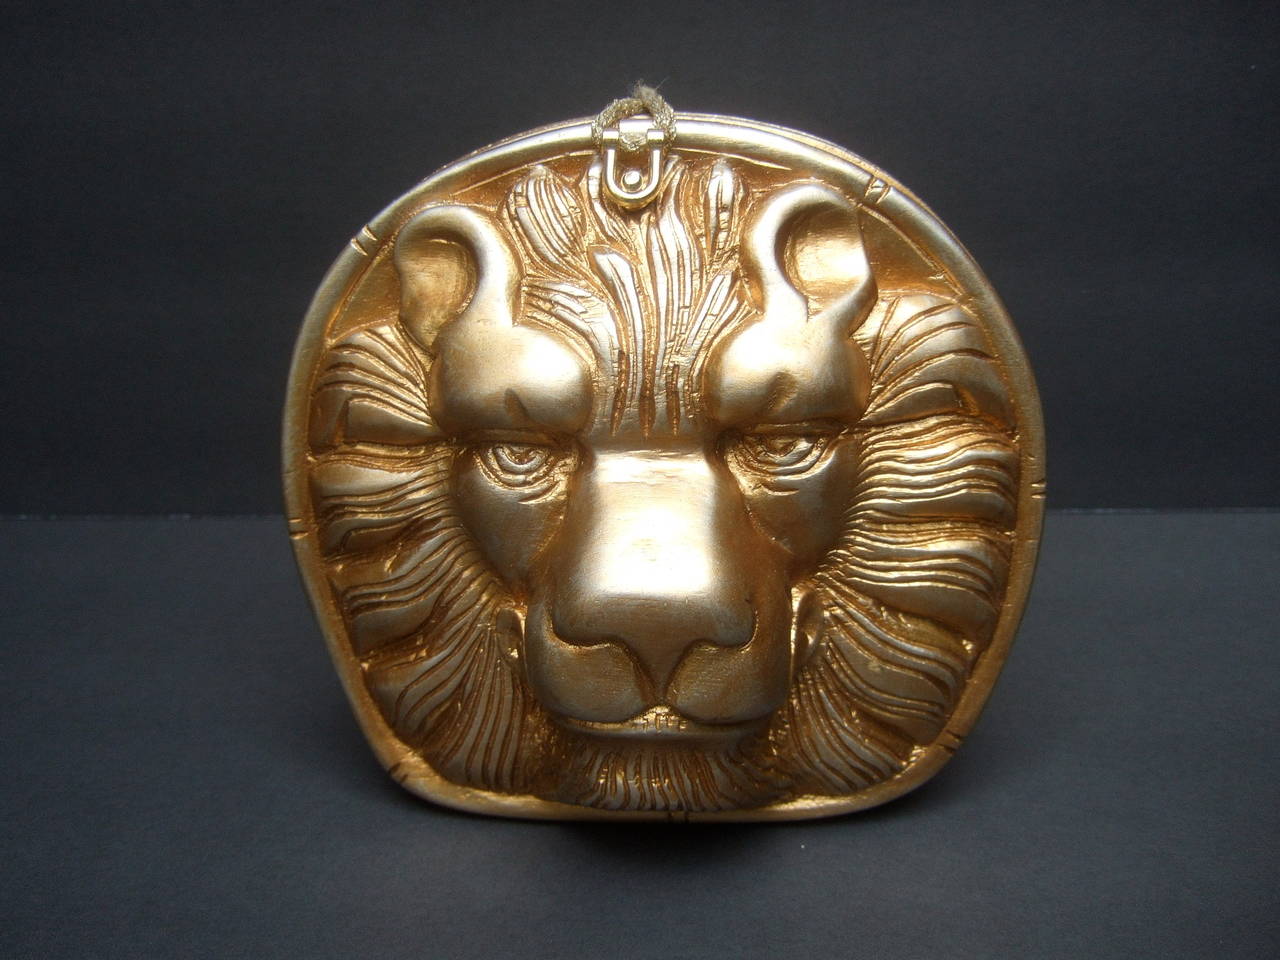 Artisan gilt enamel lion handbag designed by Timmy Woods Beverly Hills
The wood hand carved lion head handbag is covered with gold enamel
The versatile design transitions from a chic clutch bag into a stylish
shoulder bag carried with the bronze